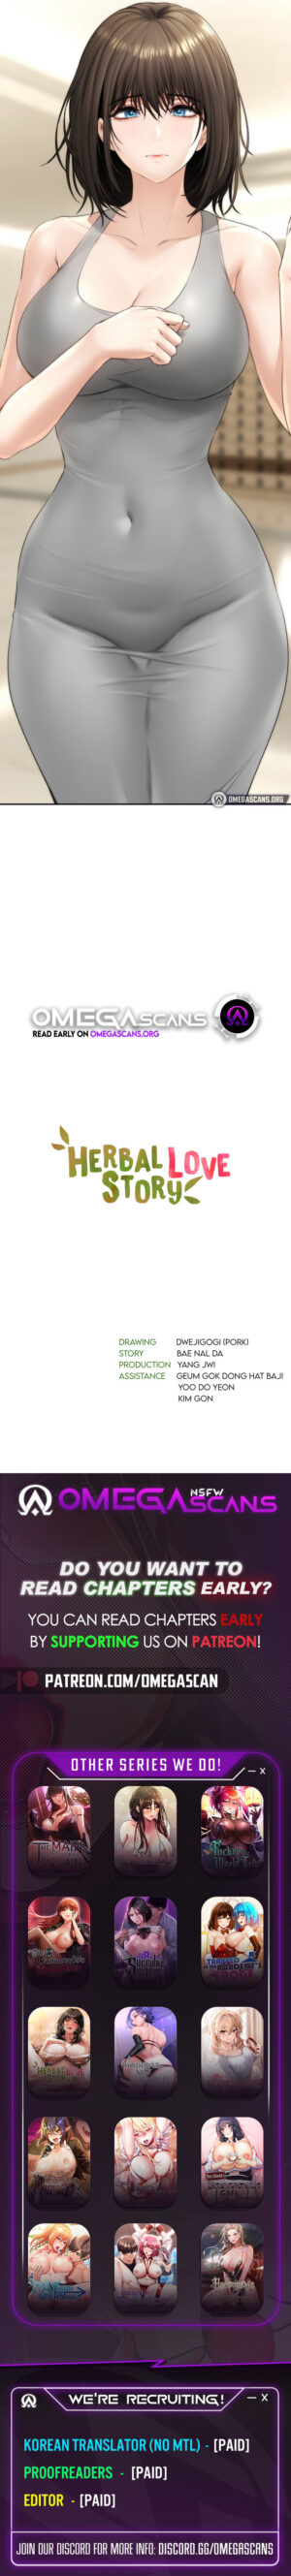 [Lee Juwon] Herbal Love Story (1-22) [English] [Omega Scans] [Ongoing]